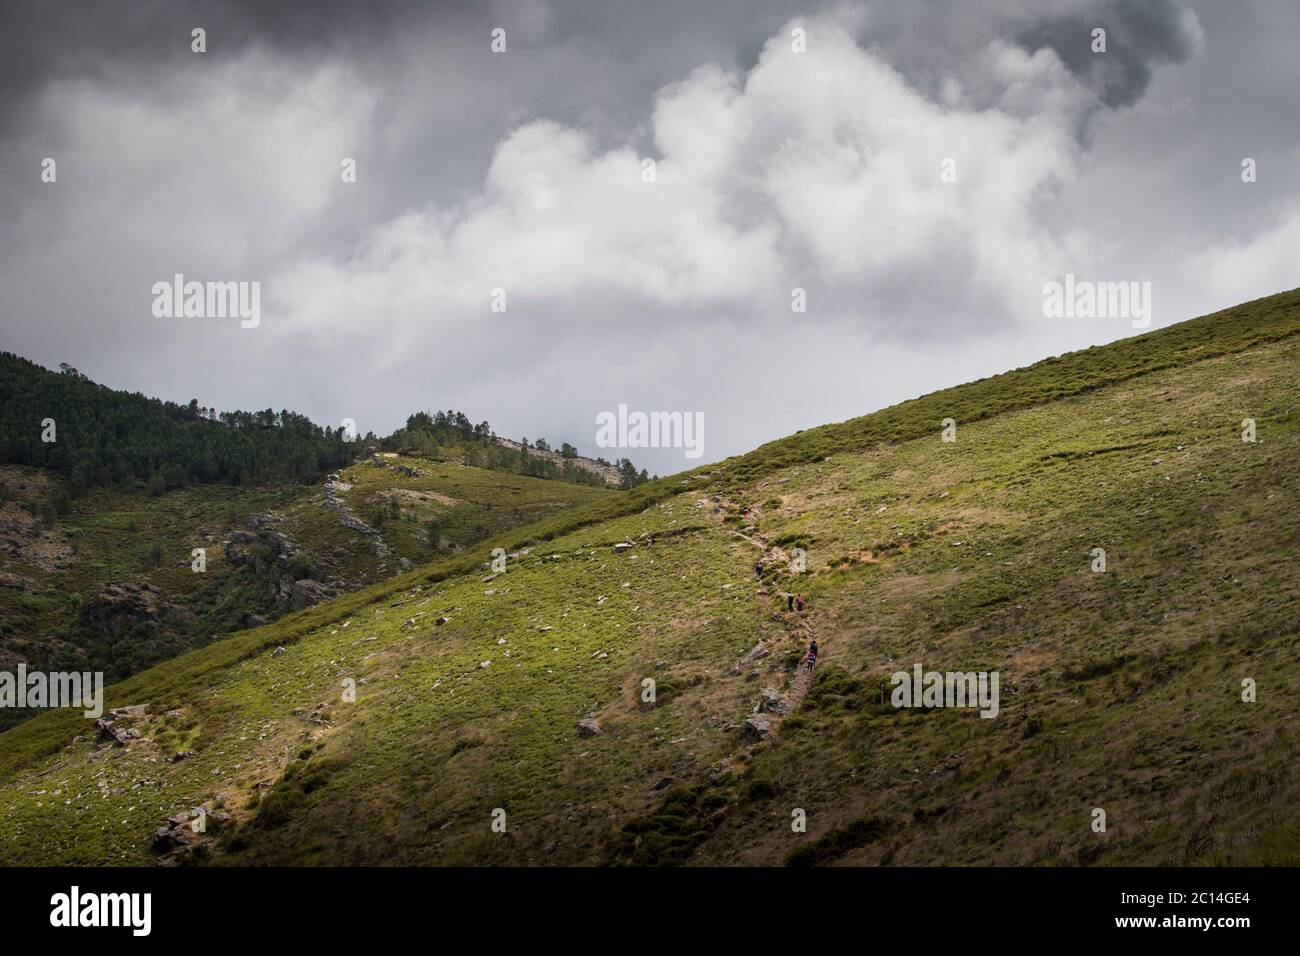 Hikers go up a green hill under grey cloudy skies Stock Photo